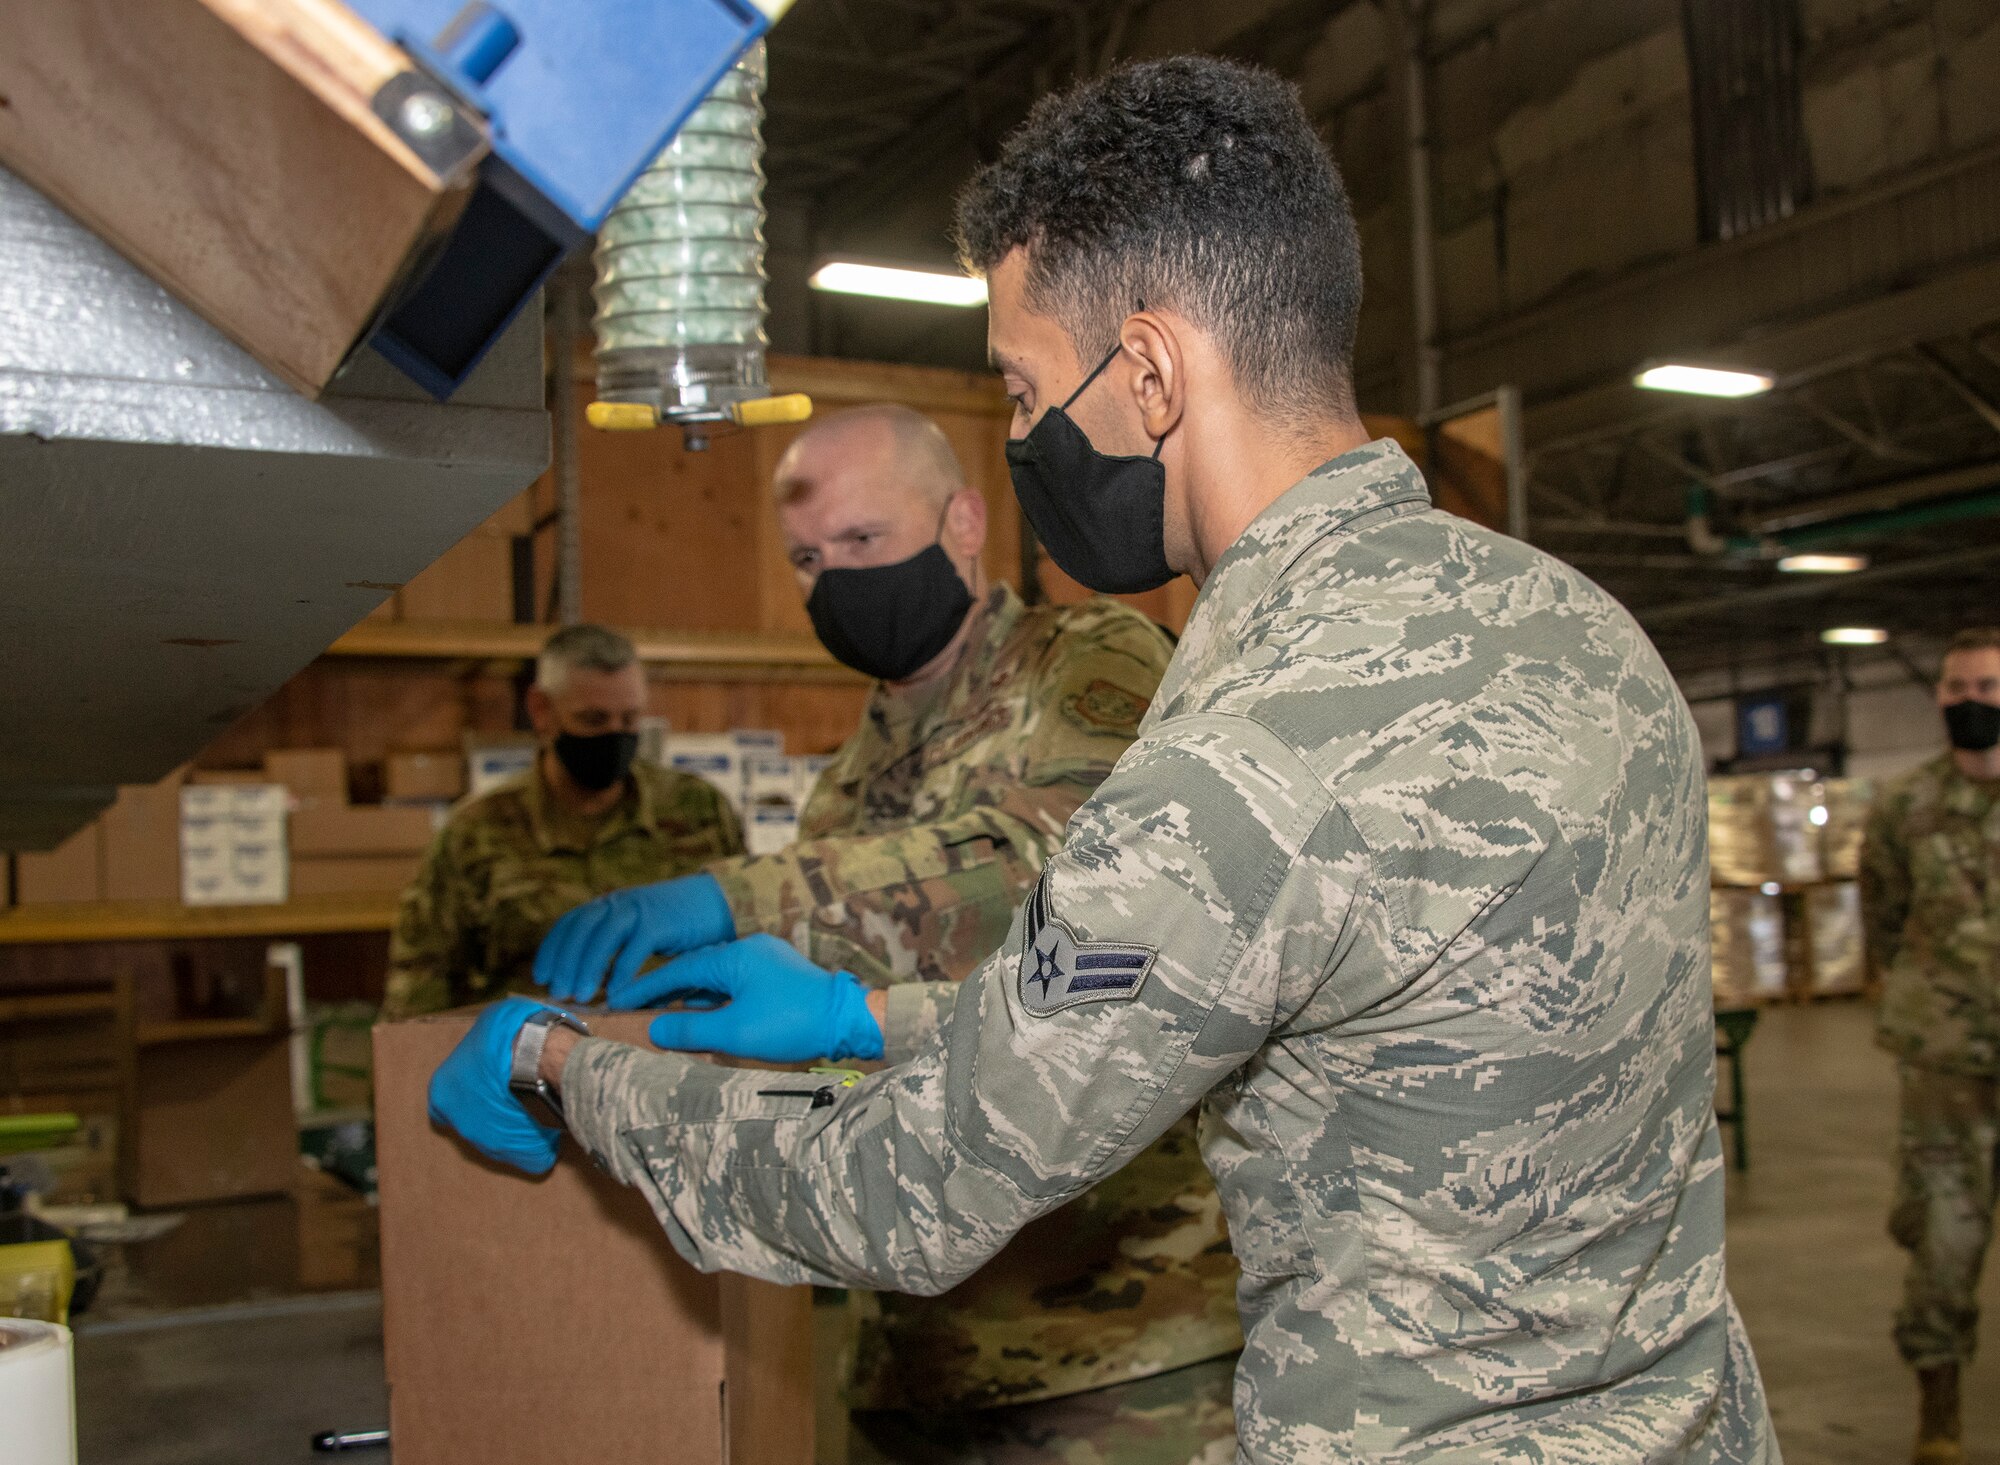 U.S. Air Force Airman 1st Class Yaser Belal, right, 60th Aerial Port Squadron packing and crating technician, and Chief Master Sgt. Robert Schultz, 60th Air Mobility Wing command chief, secure a box for shipment during Leadership Rounds July 24, 2020, at Travis Air Force Base, California. The 60th APS is the United States Transportation Command's primary west coast aerial port providing global and passenger distribution for the United States and its Allies. The Leadership Rounds program provides 60th AMW leadership an opportunity to interact with Airmen and get a detailed view of each mission performed at Travis AFB. (U.S. Air Force photo by Heide Couch)